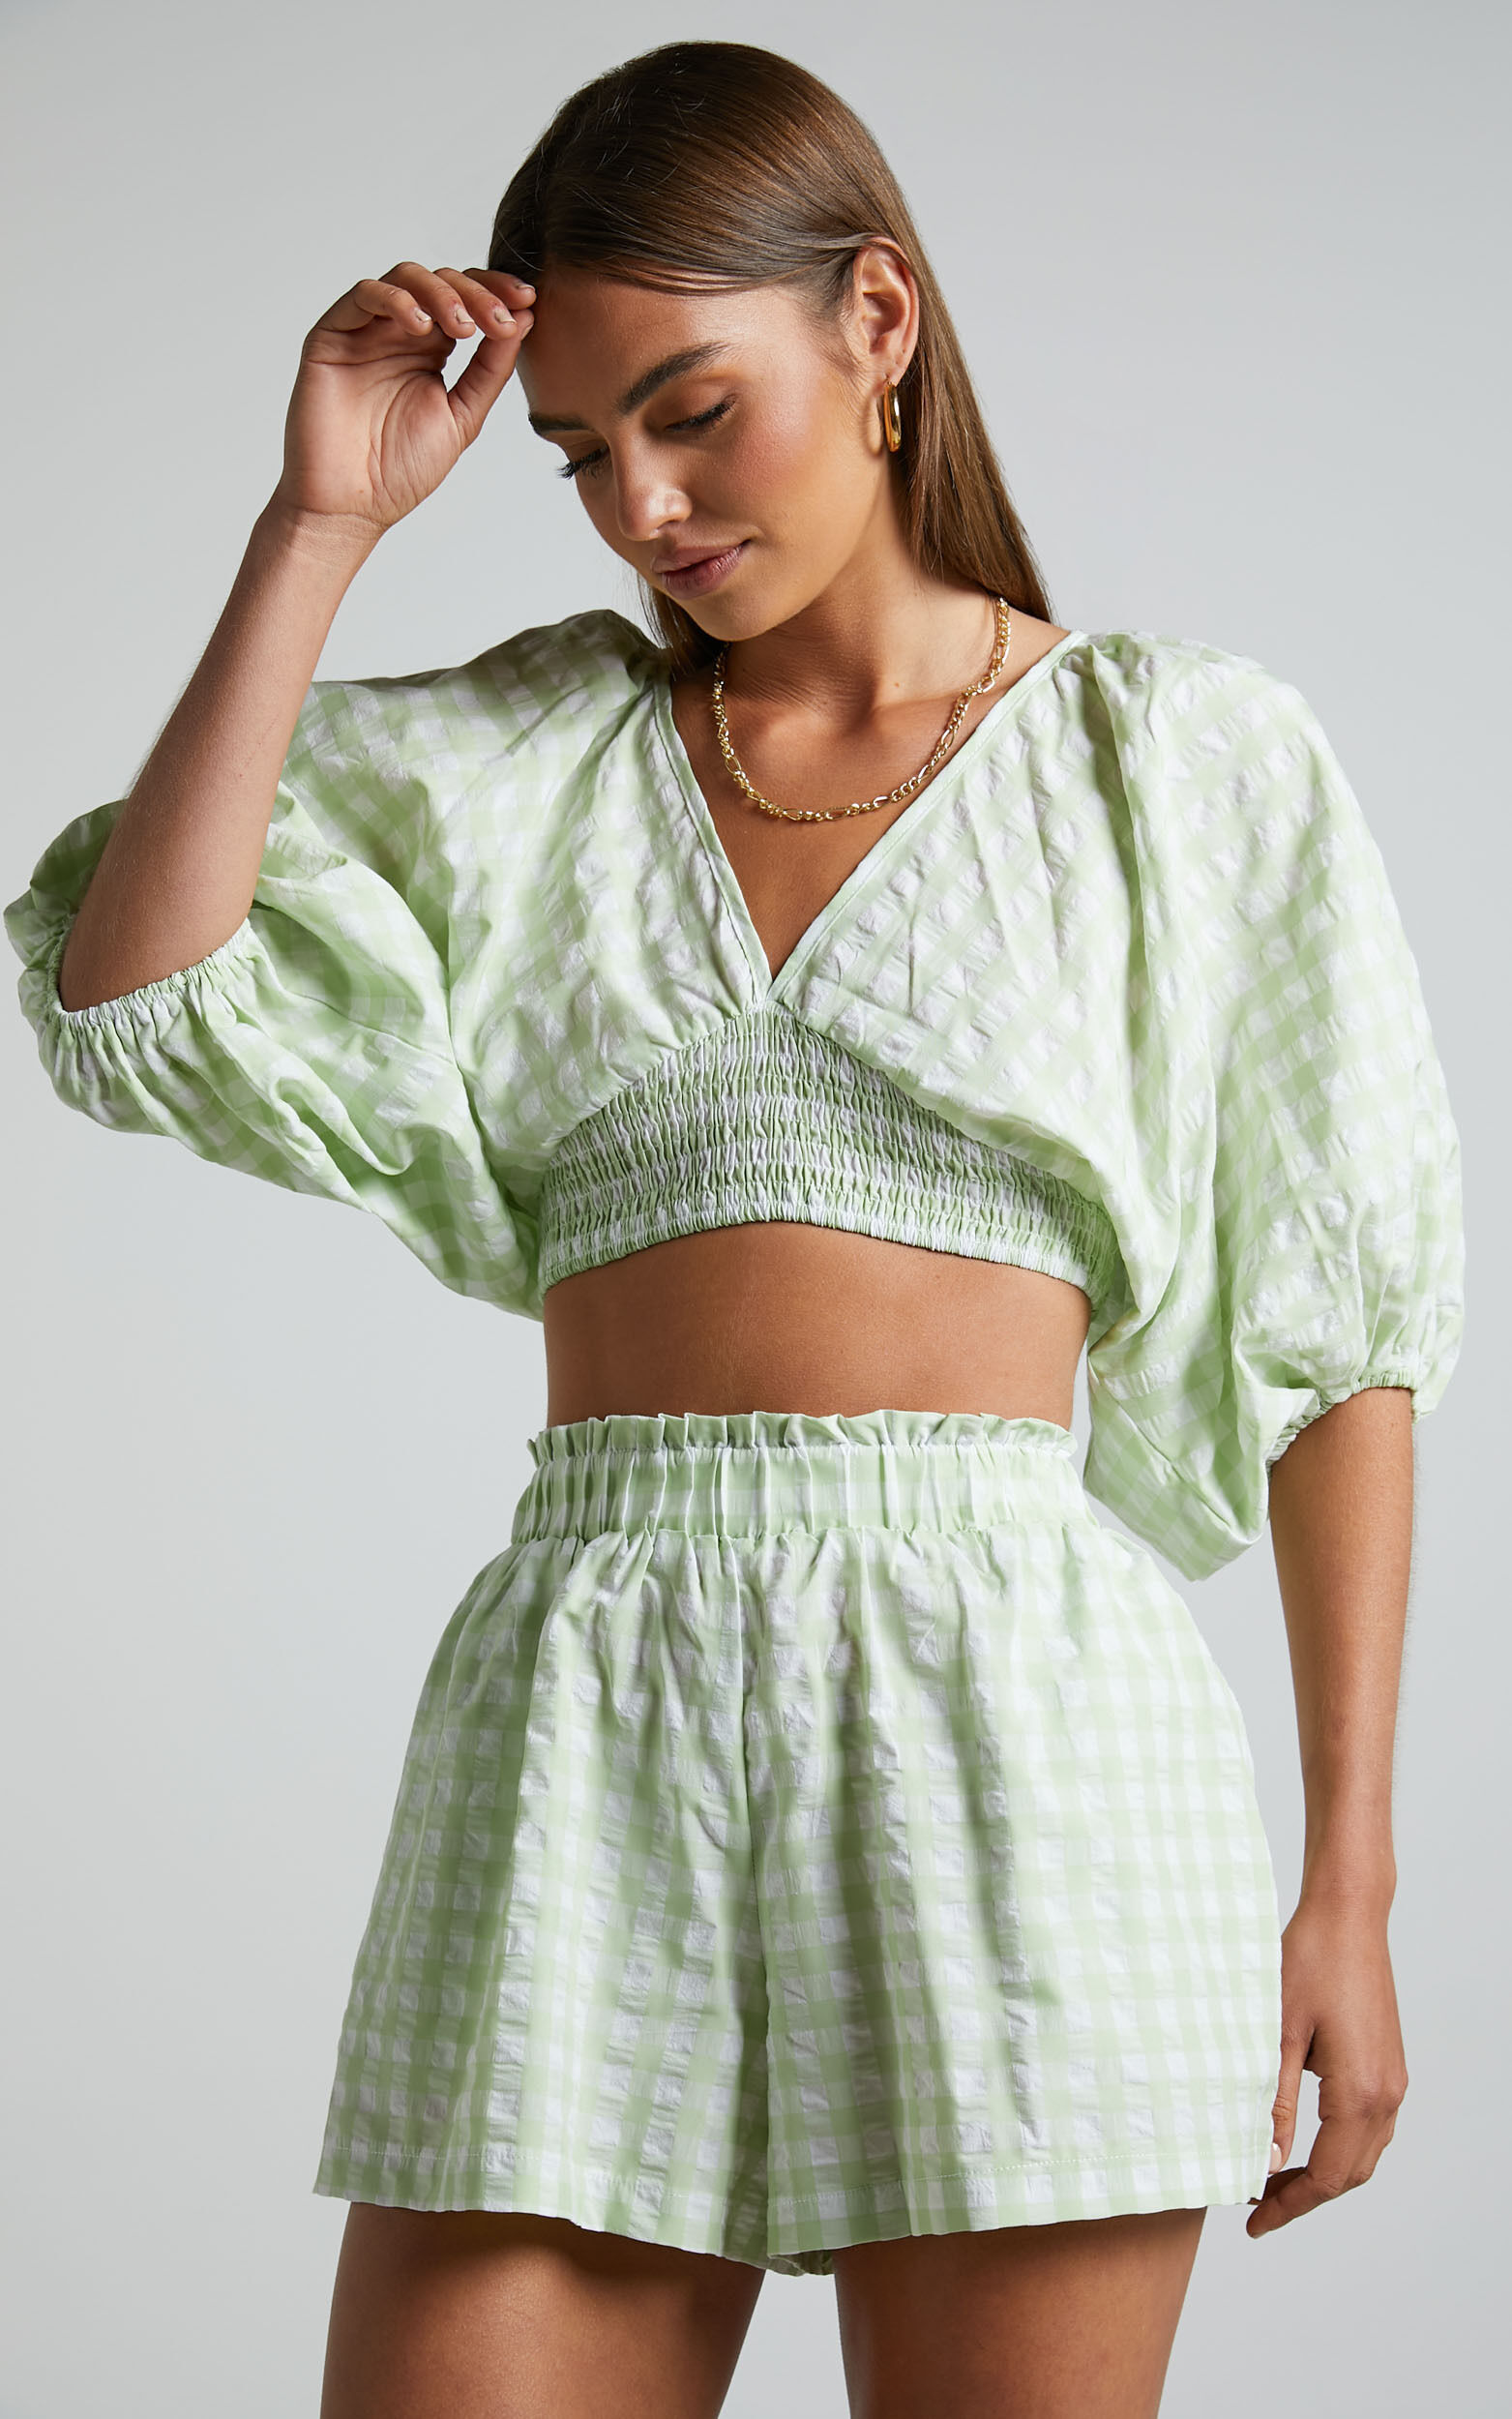 Madelyn Top - V Neck Batwing Puff Sleeve Crop Top in Mint Gingham - 04, GRN1